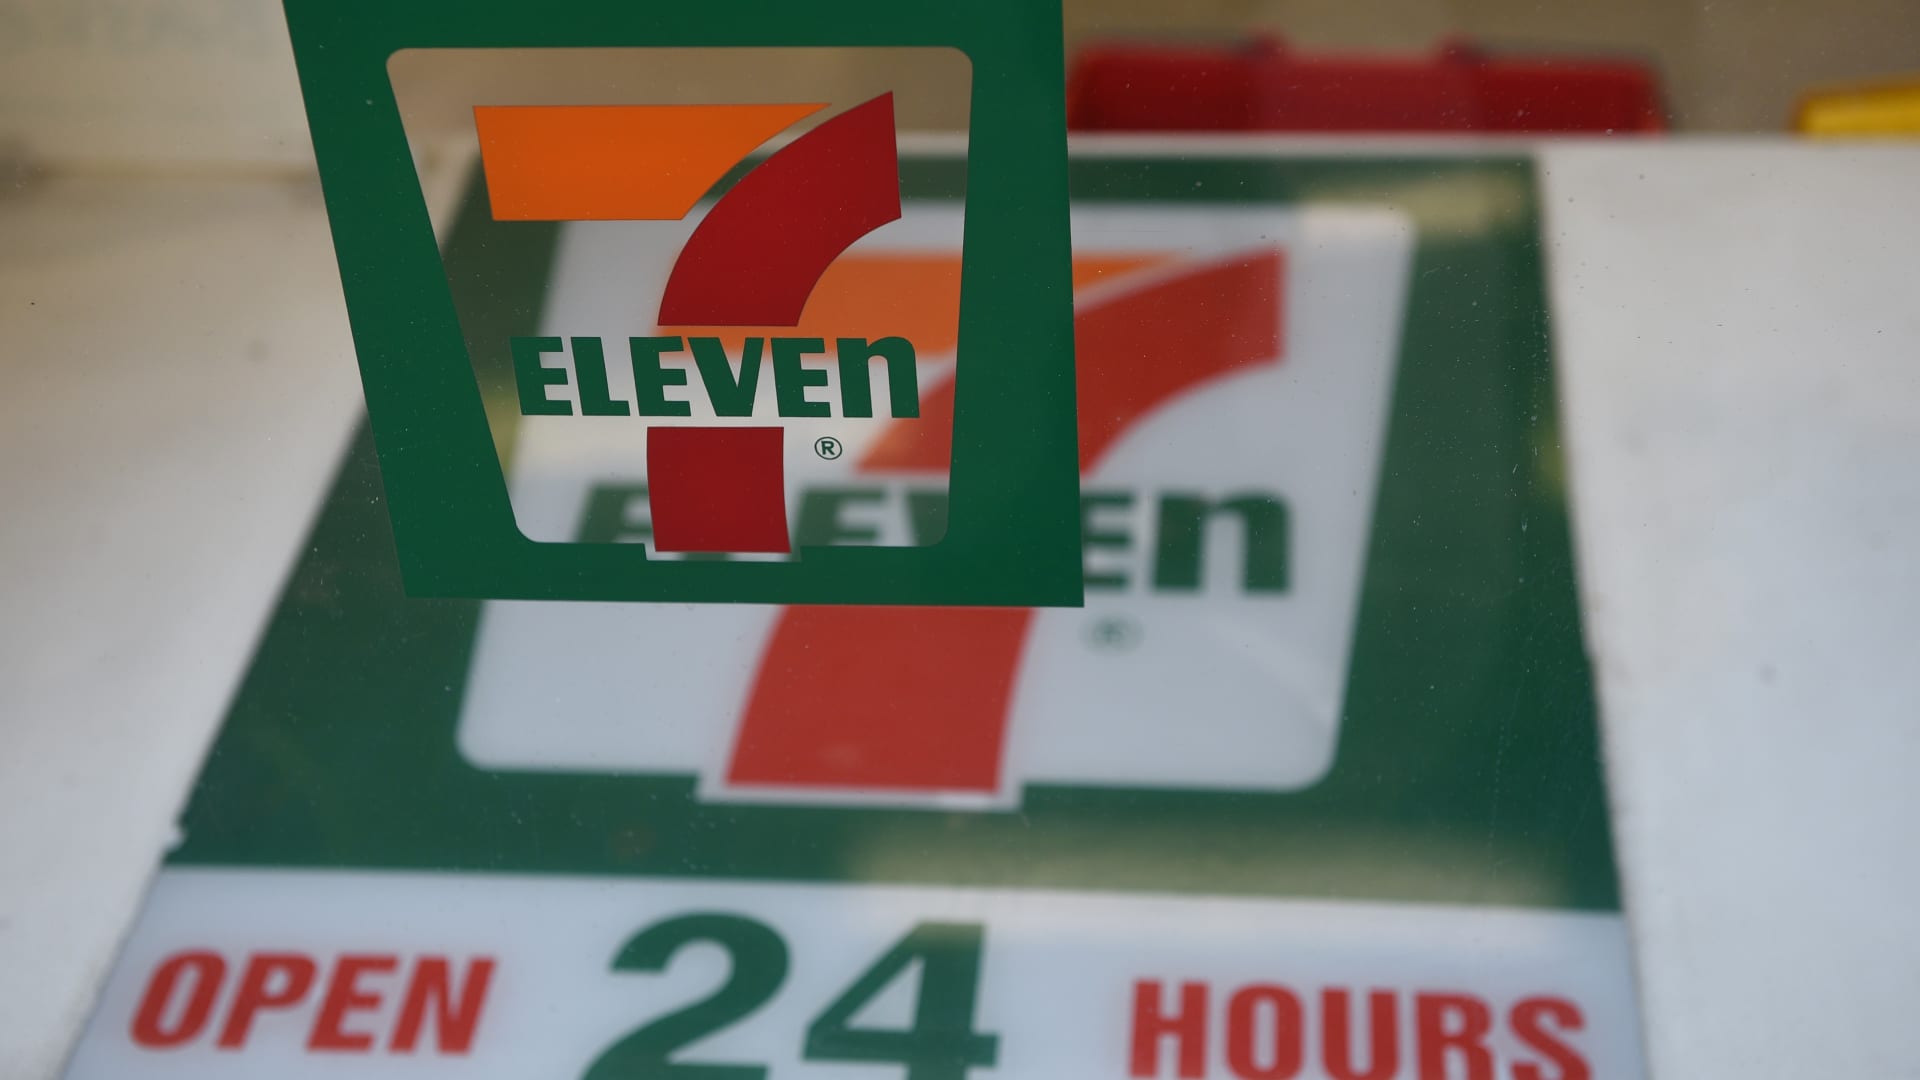 7-Eleven is cutting 880 jobs as part of restructuring